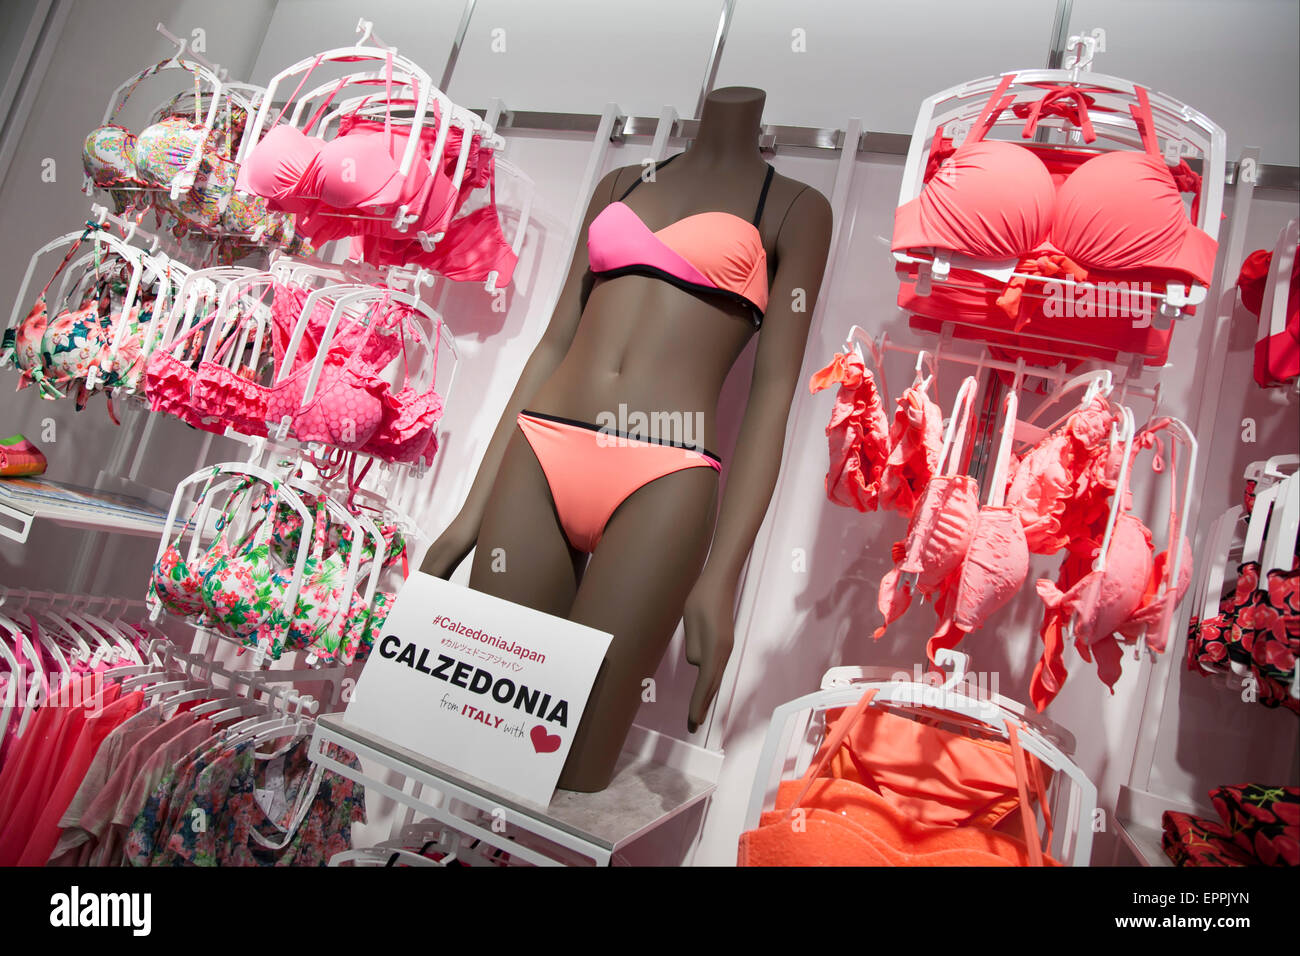 Tokyo, Japan. 21st May, 2015. Swimsuits on display at the new Calzedonia  store in Omotesando on May 21, 2015, Tokyo, Japan. Calzedonia is an Italian  specialist store that specializes in selling swimwear